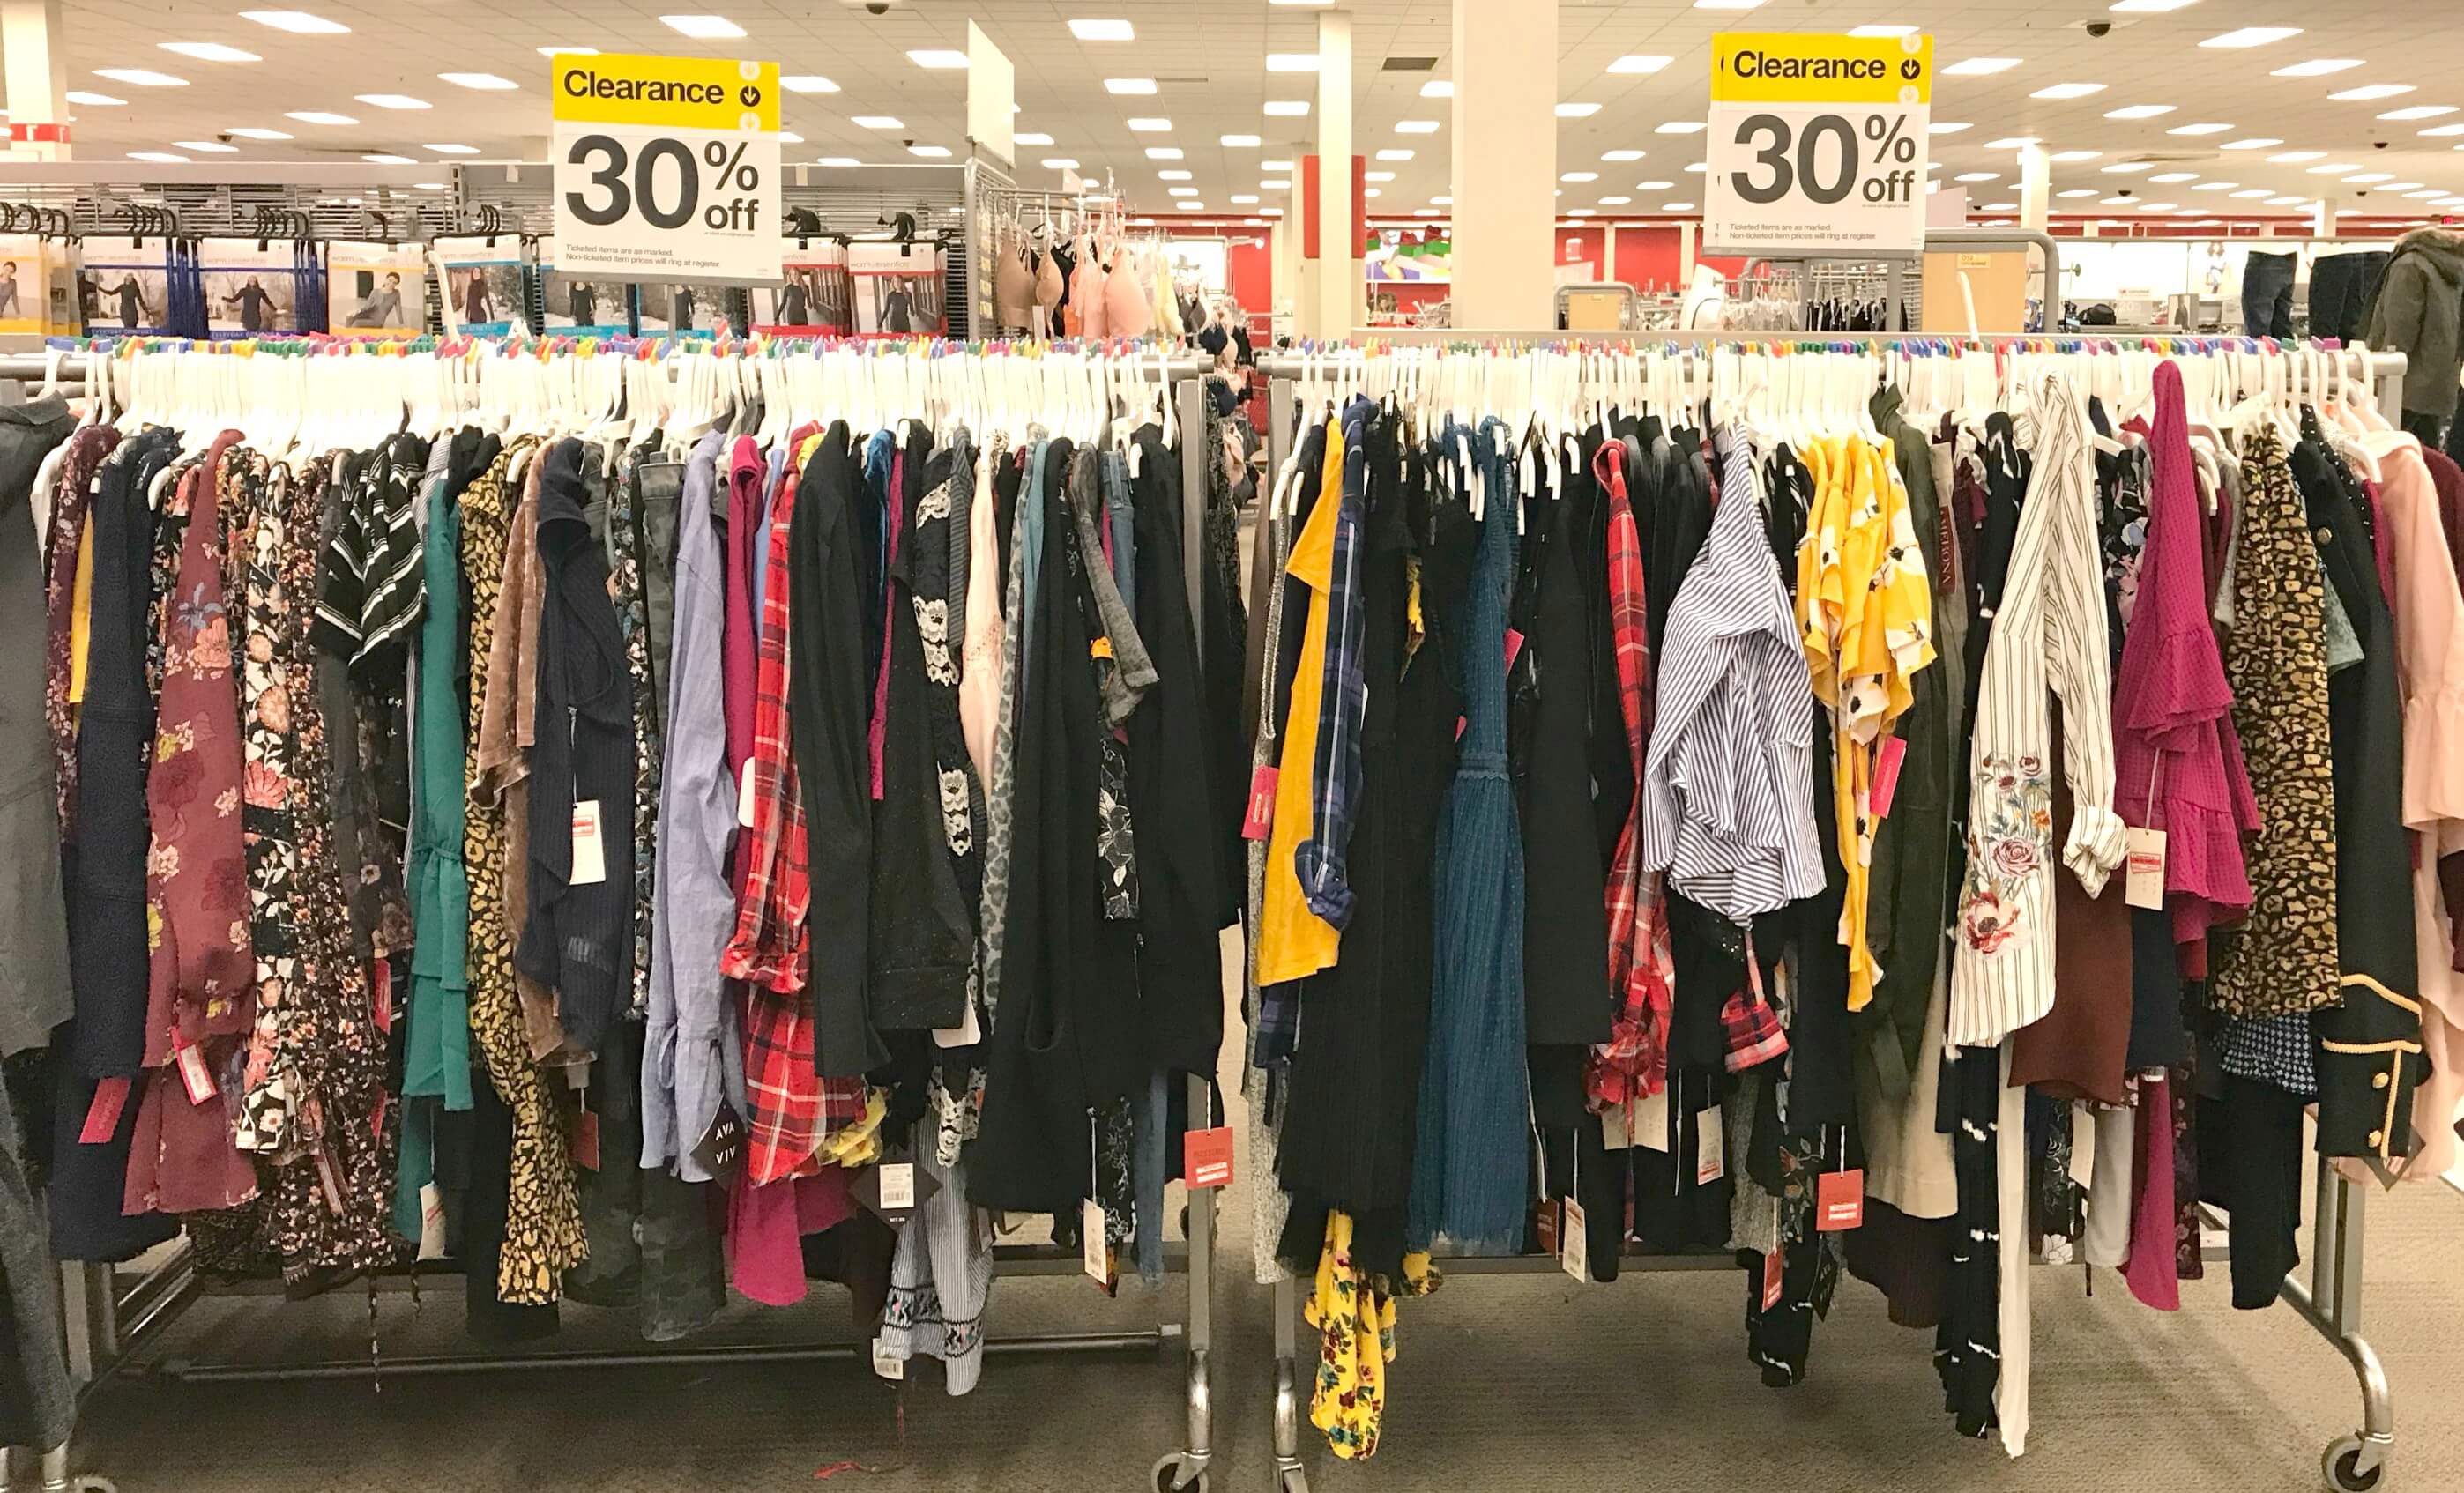 Get an Extra 20% off Clearance Women Clothing & Accessories at Target! | Living Rich With CouponsÂ®